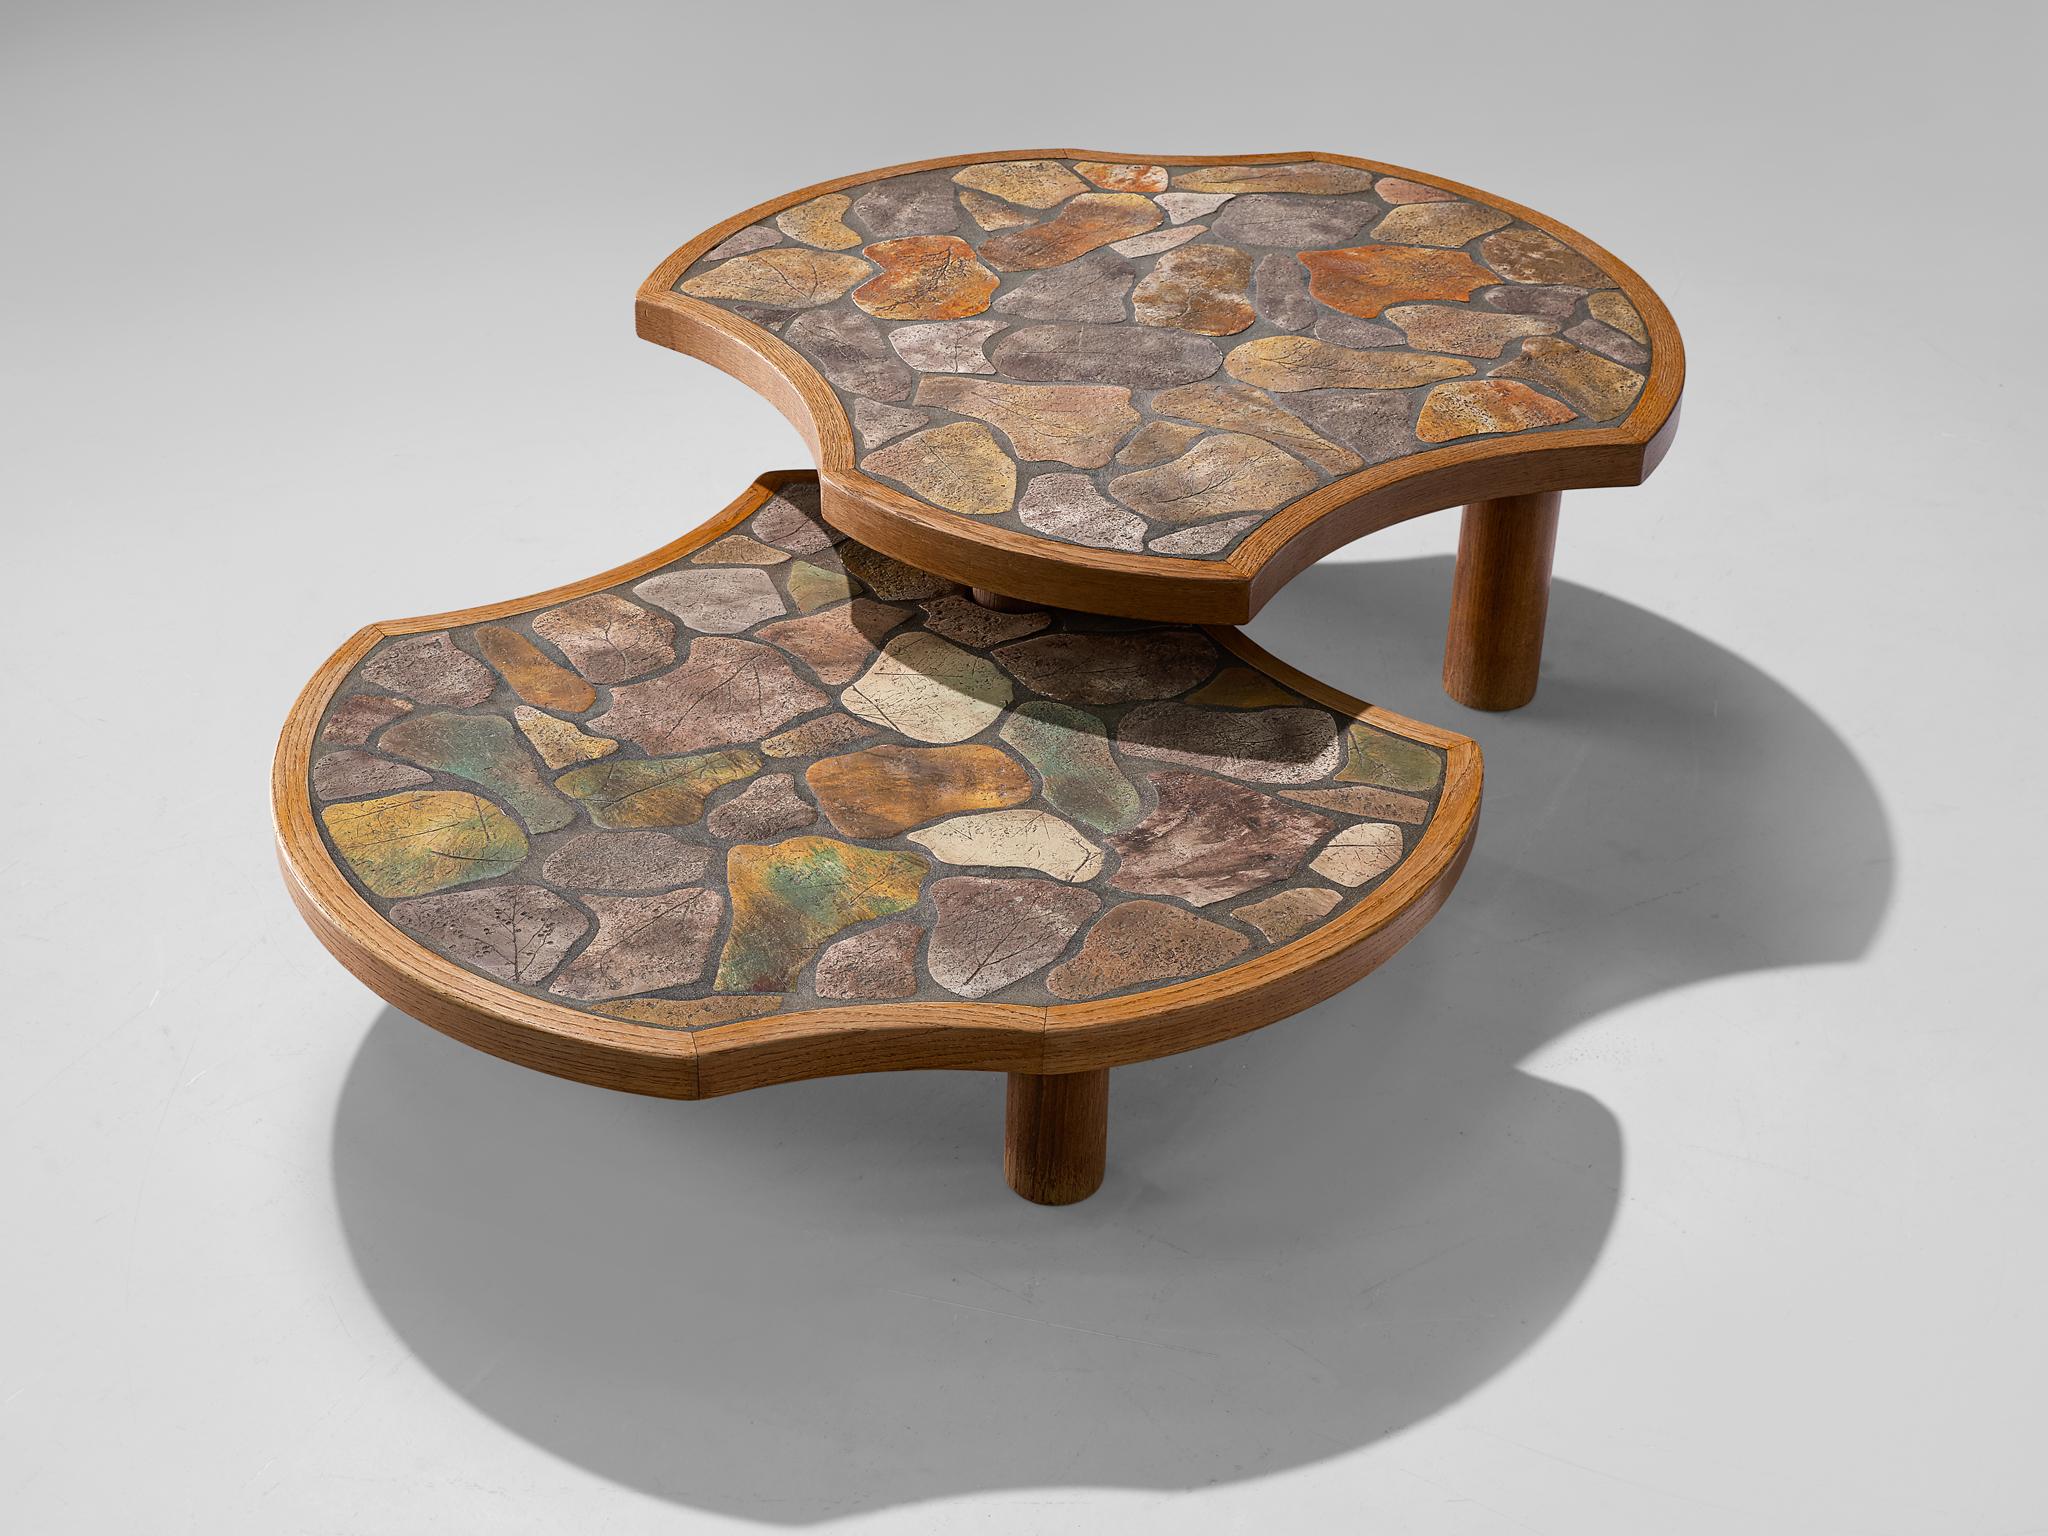 Barrois, coffee table, stone wear ceramic and oak, France, 1960s

Biomorphic shaped cocktail table, consisting of two tables connected to each other. One table is slightly higher than the other, which results in a dynamic look. Conical legs are